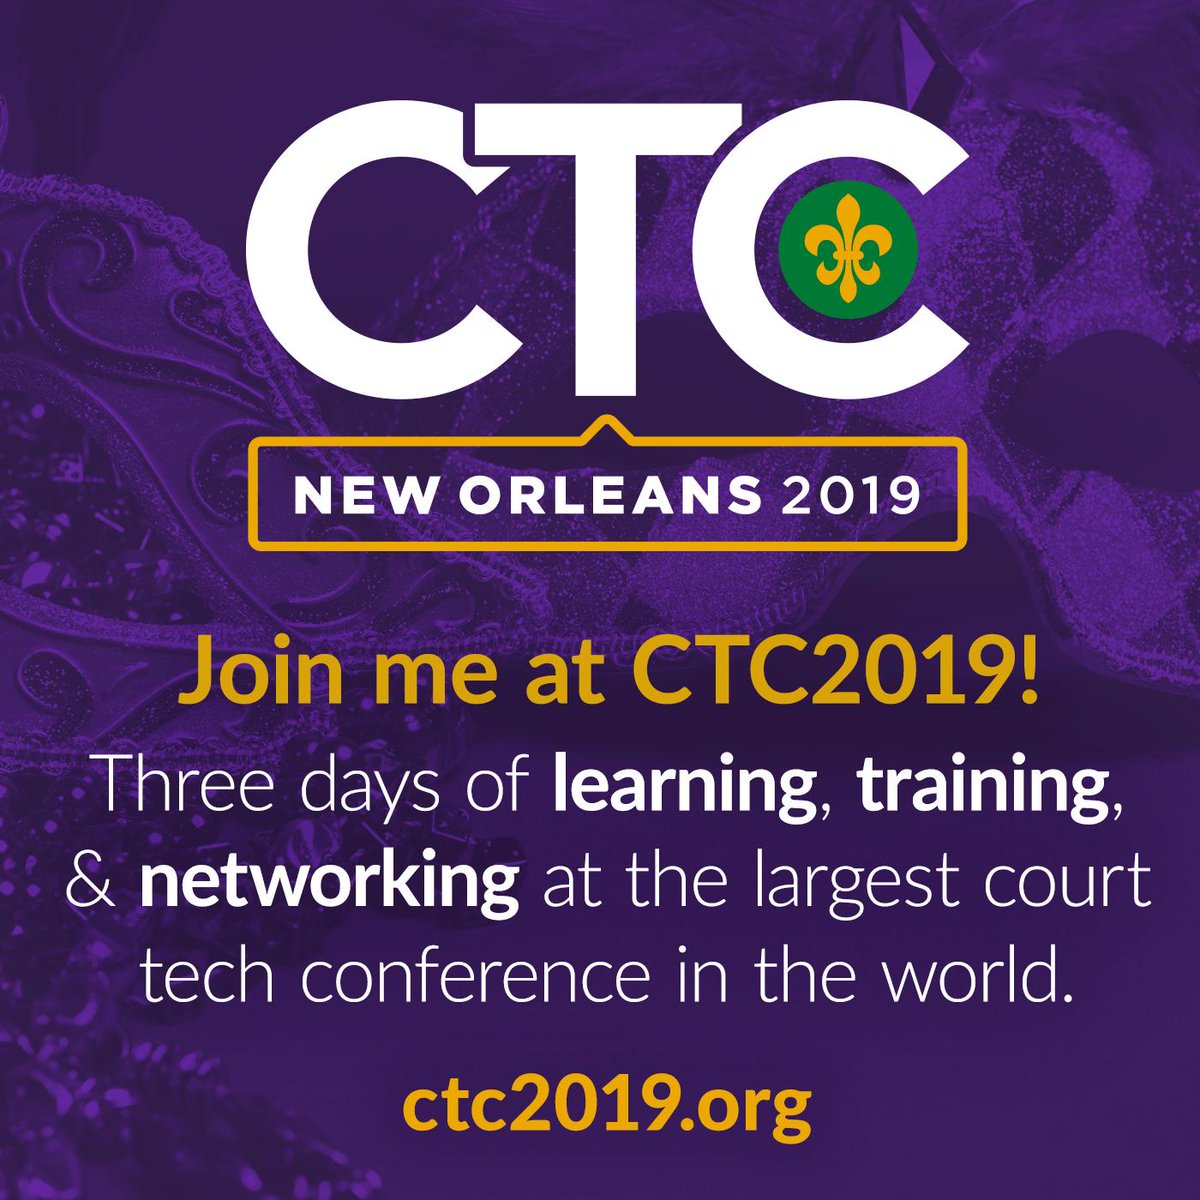 Mvix is ridin' the steamboat down to New Orleans for the 2019 Court Technology Conference! Visit us at booth #638 to demo our court docket displays. hubs.ly/H0jzw4t0 @StateCourts #CTC2019 #mvixevents #courtdockets #docketdisplays #Court #courtsolutions #techforcourts